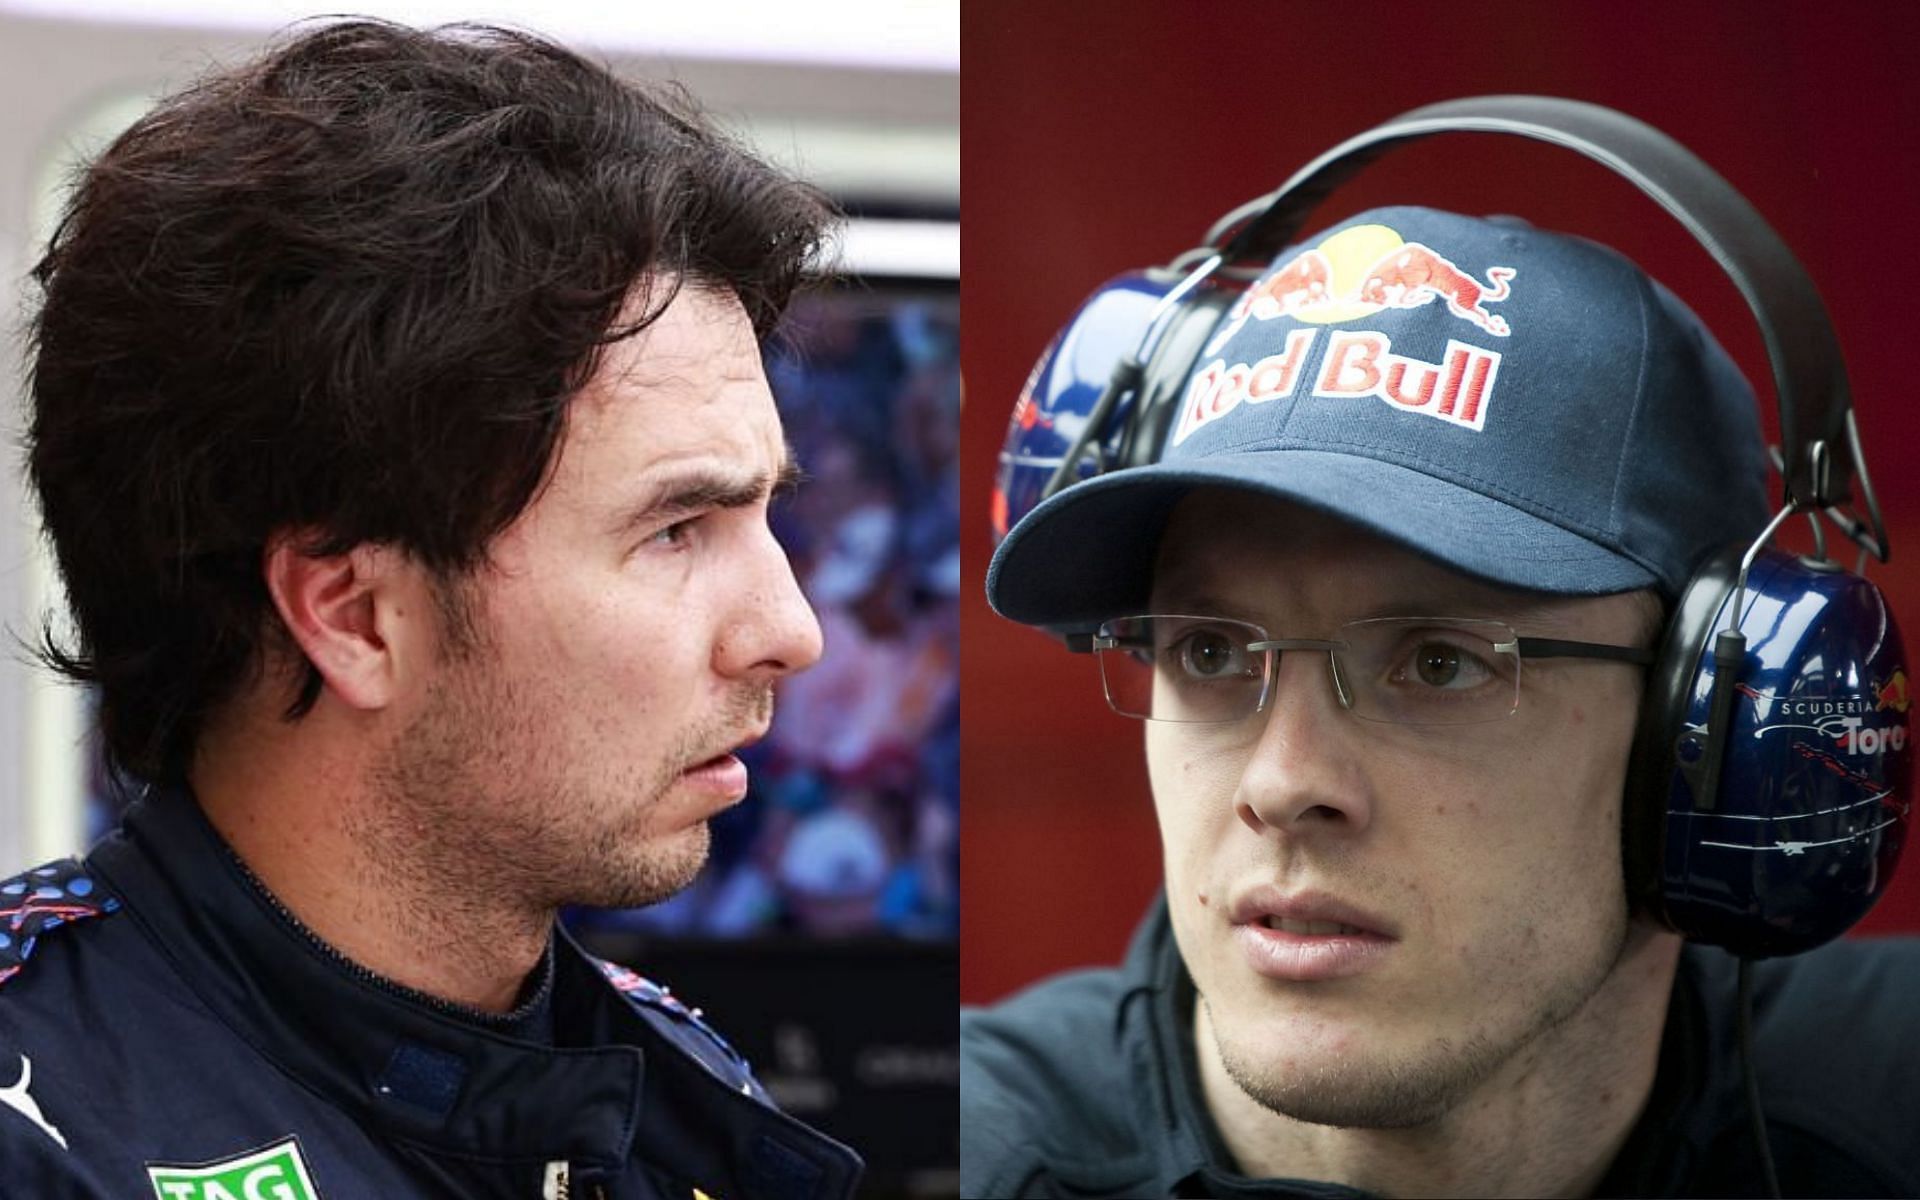 S&eacute;bastien Bourdais (right) has accused Sergio Perez of &quot;dirty driving&quot; and holding up Lewis Hamilton.